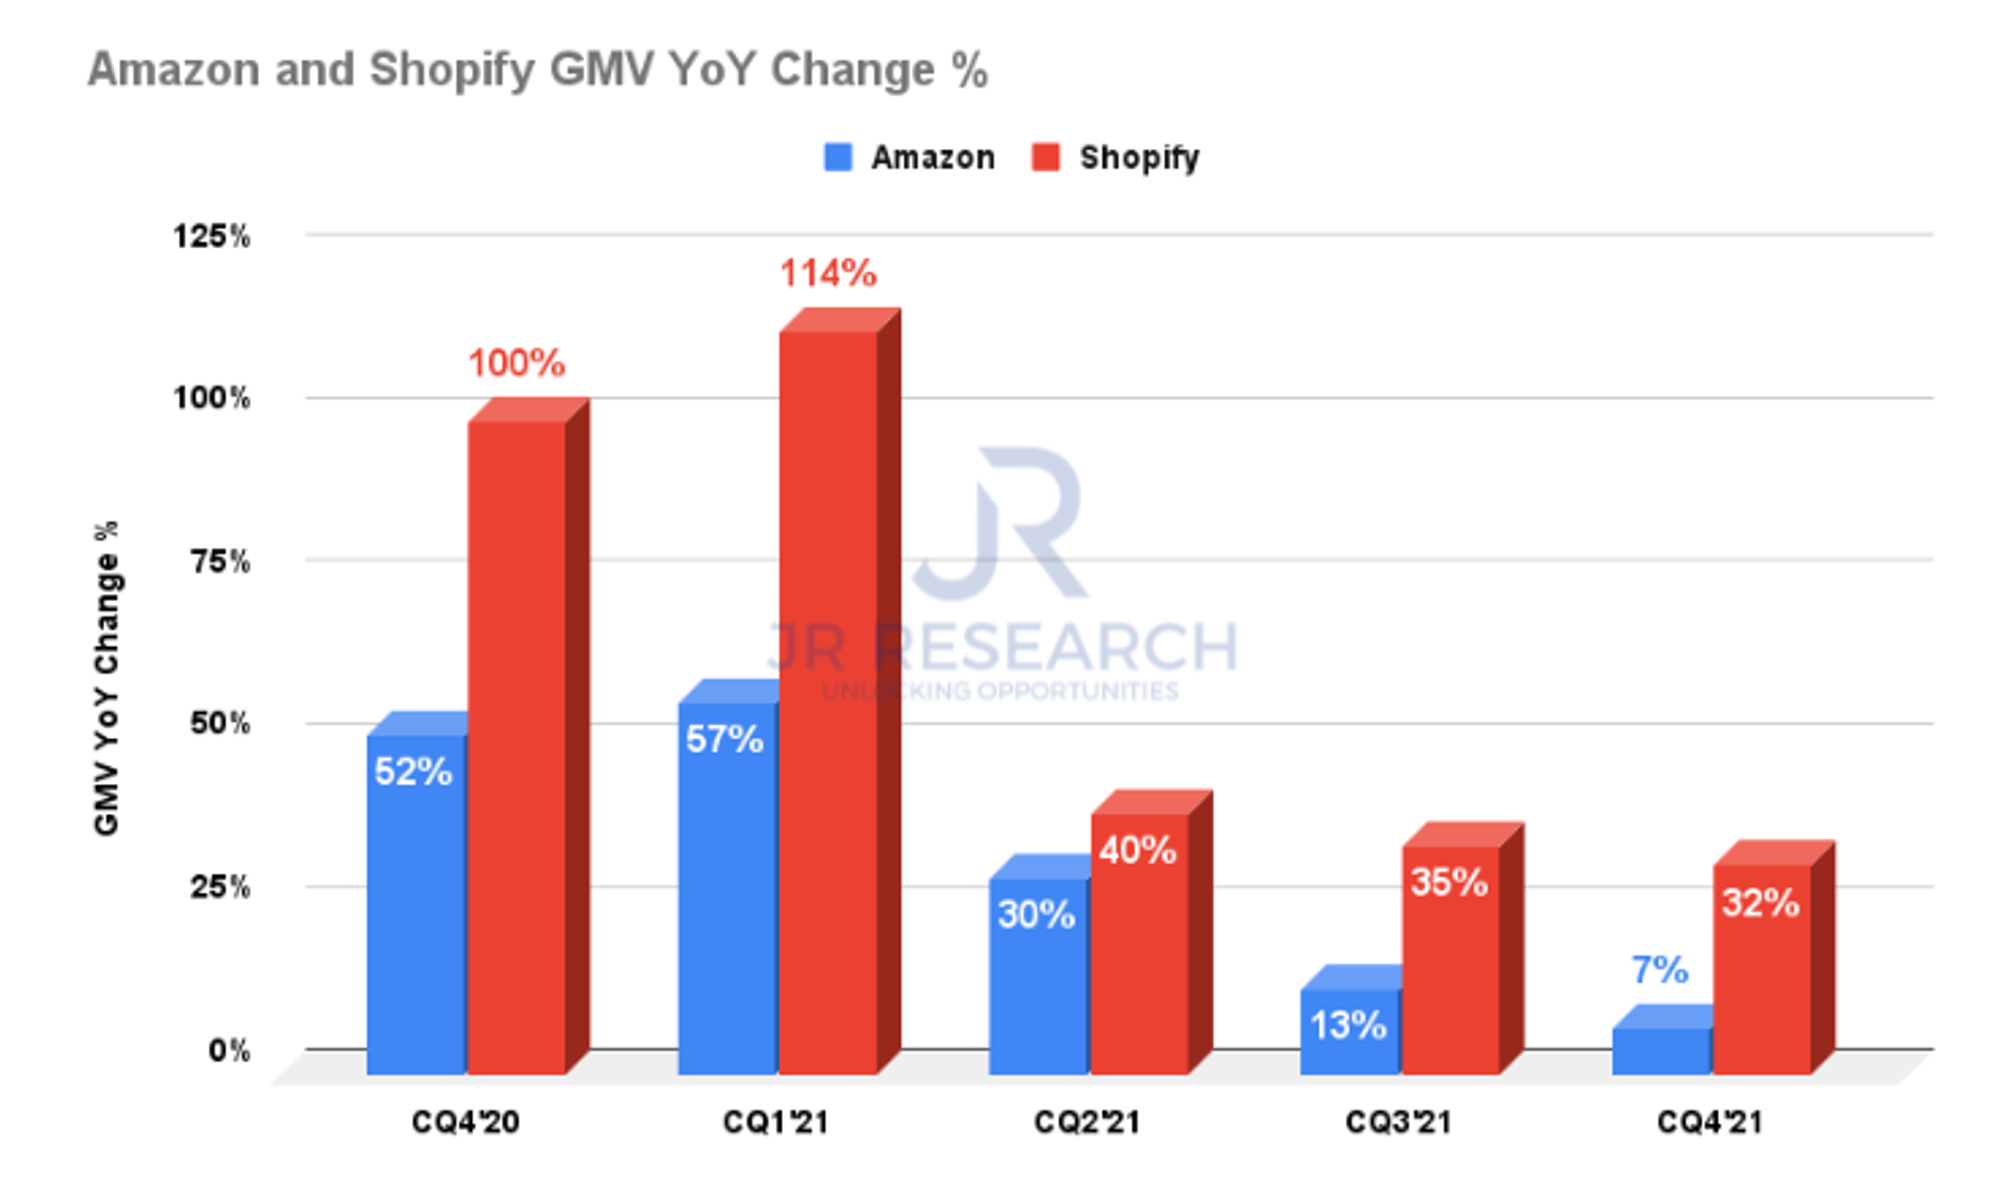 Amazon and Shopify's quarterly GMV year-on-year growth rate (change). Source: JR Research